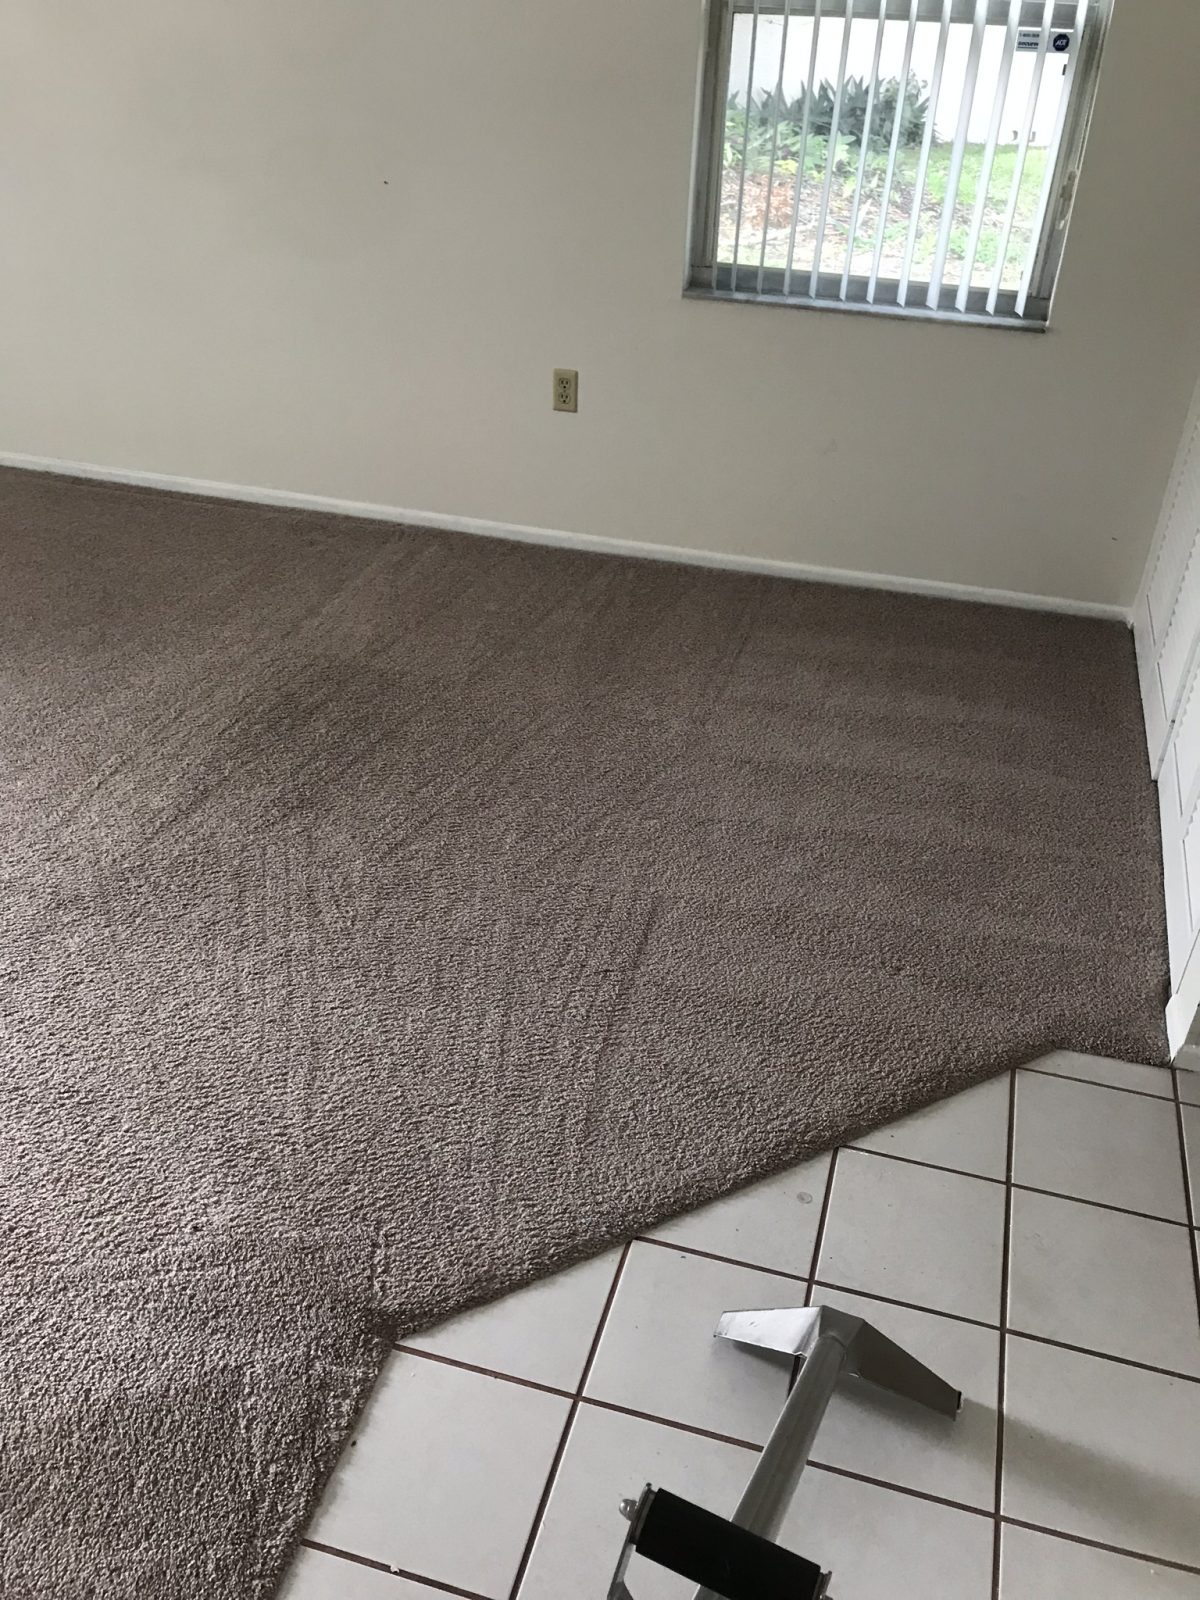 Professional Carpet Cleaning Clearwater Florida by Howards Cleaning Service